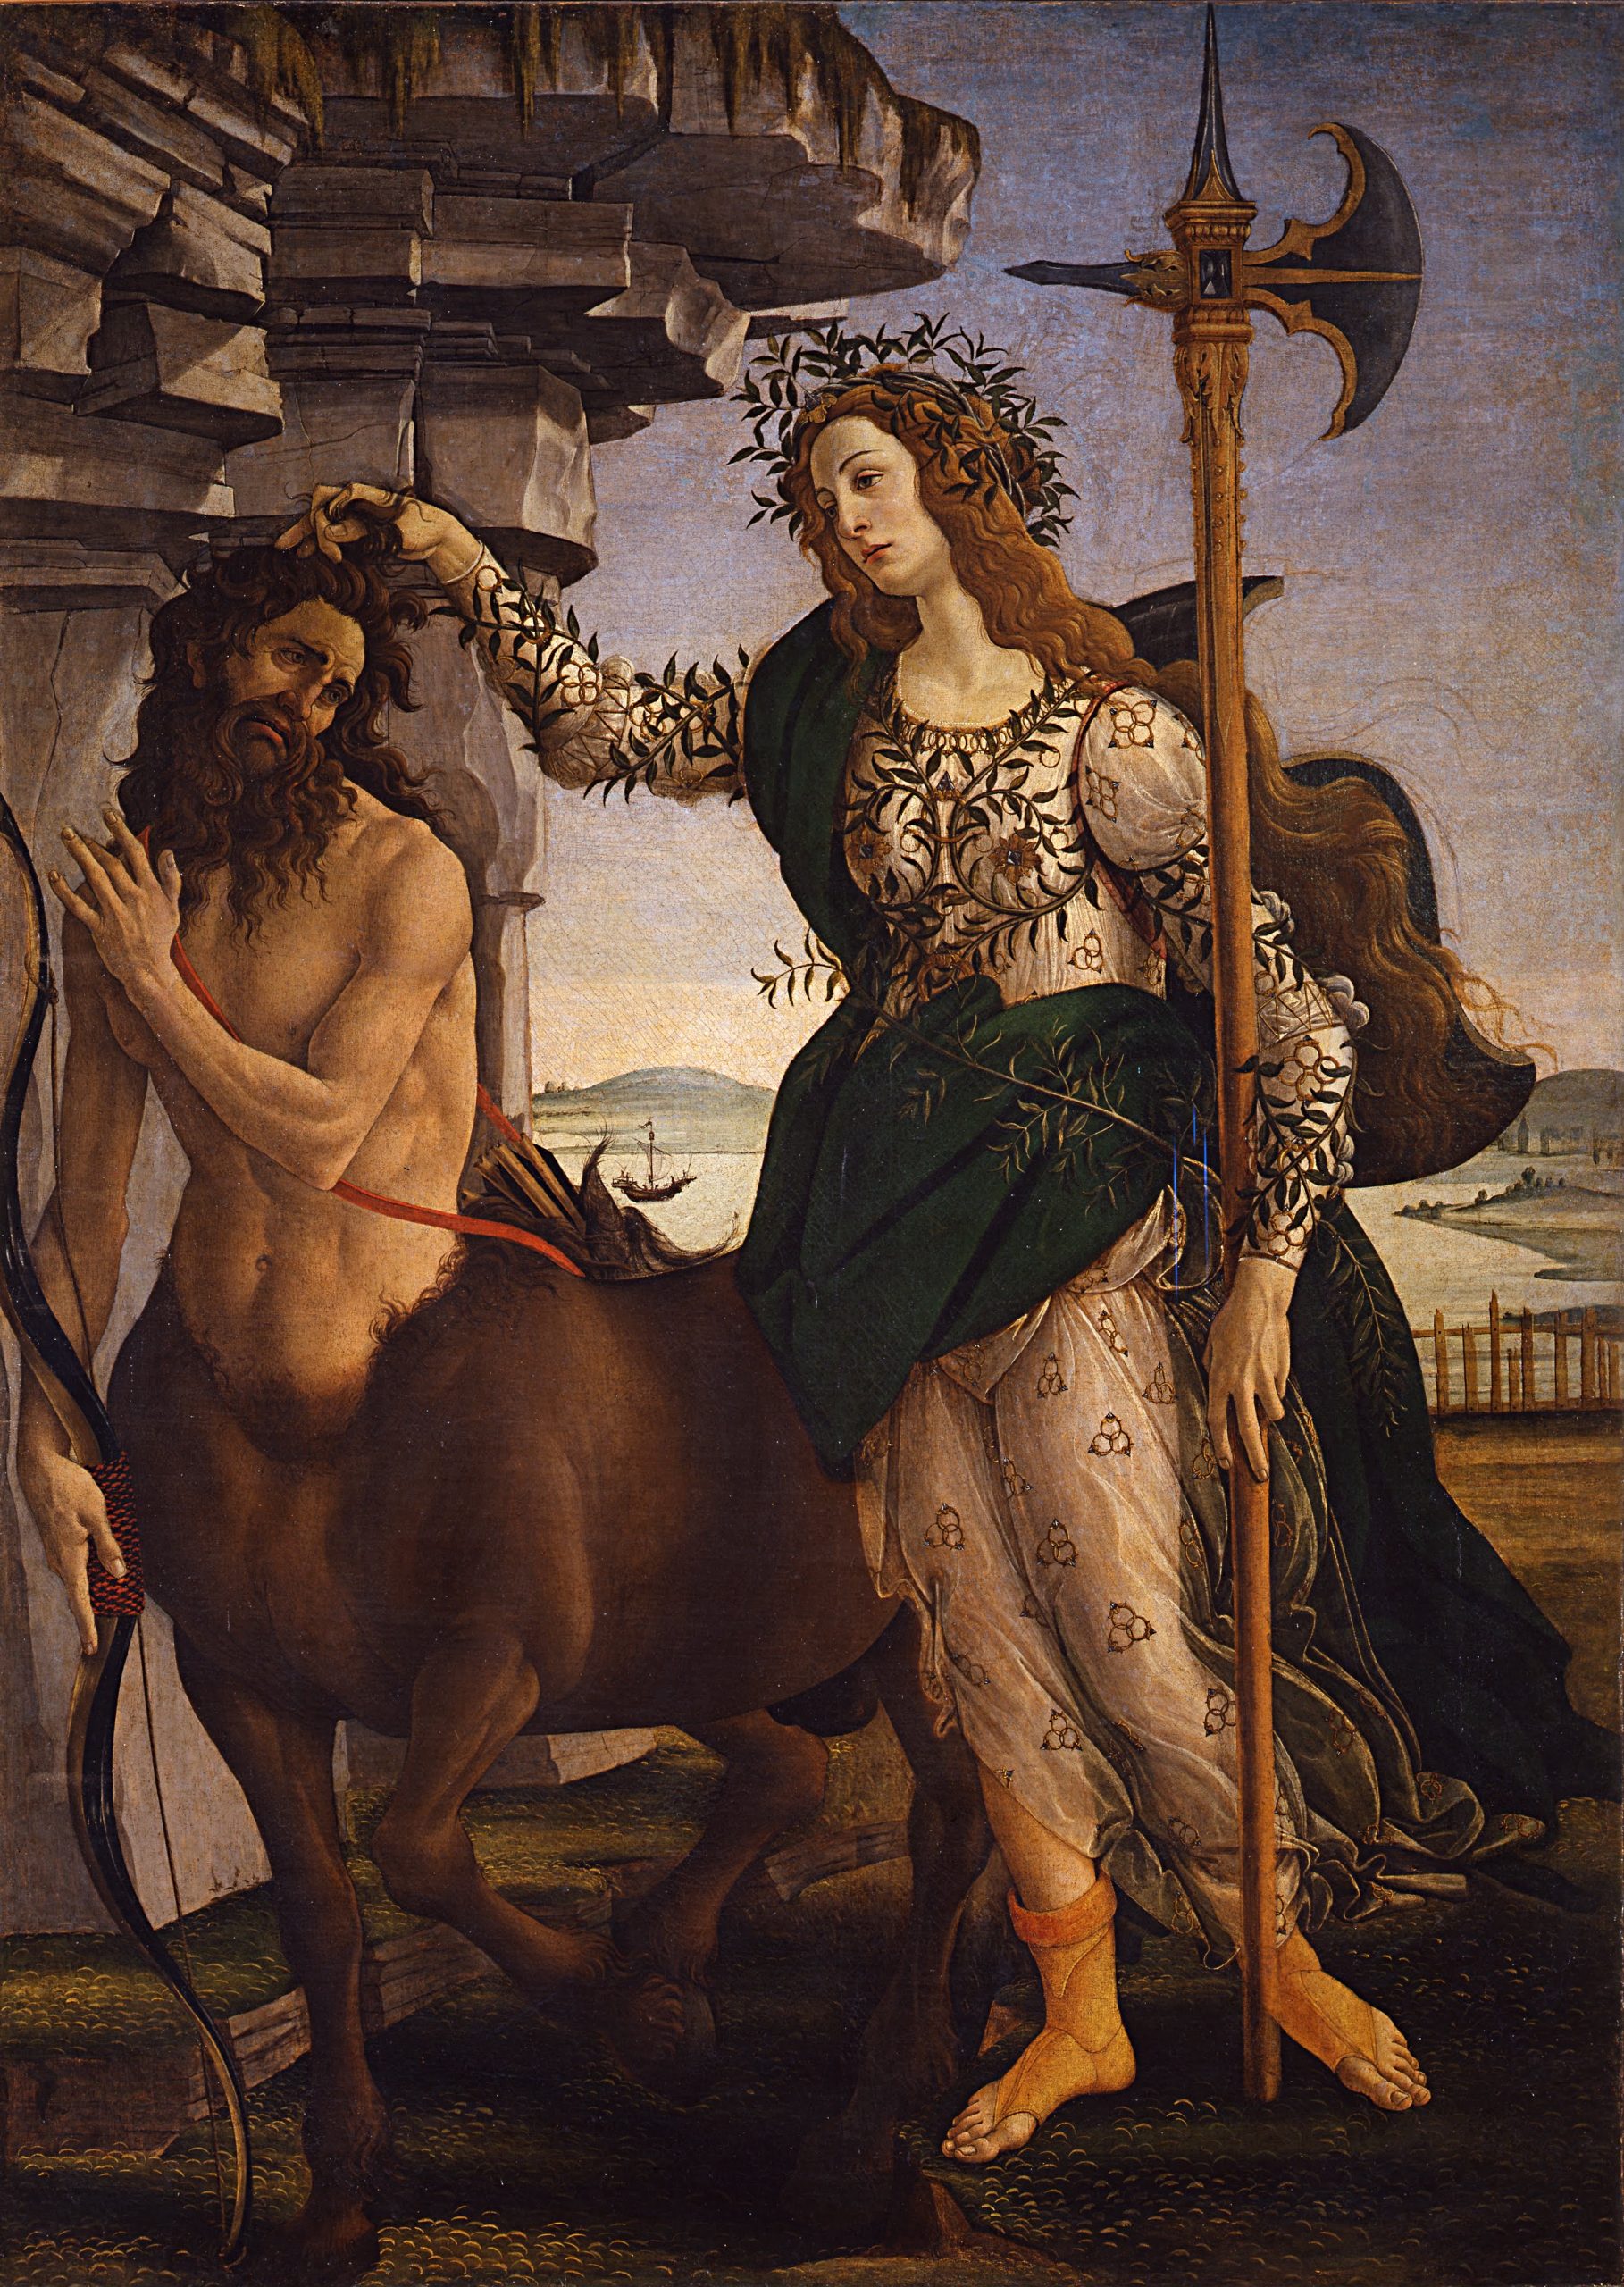 A woman stands by the side of a wall holding a sword while pulling the hair of a centaur who rests along the wall next to her.